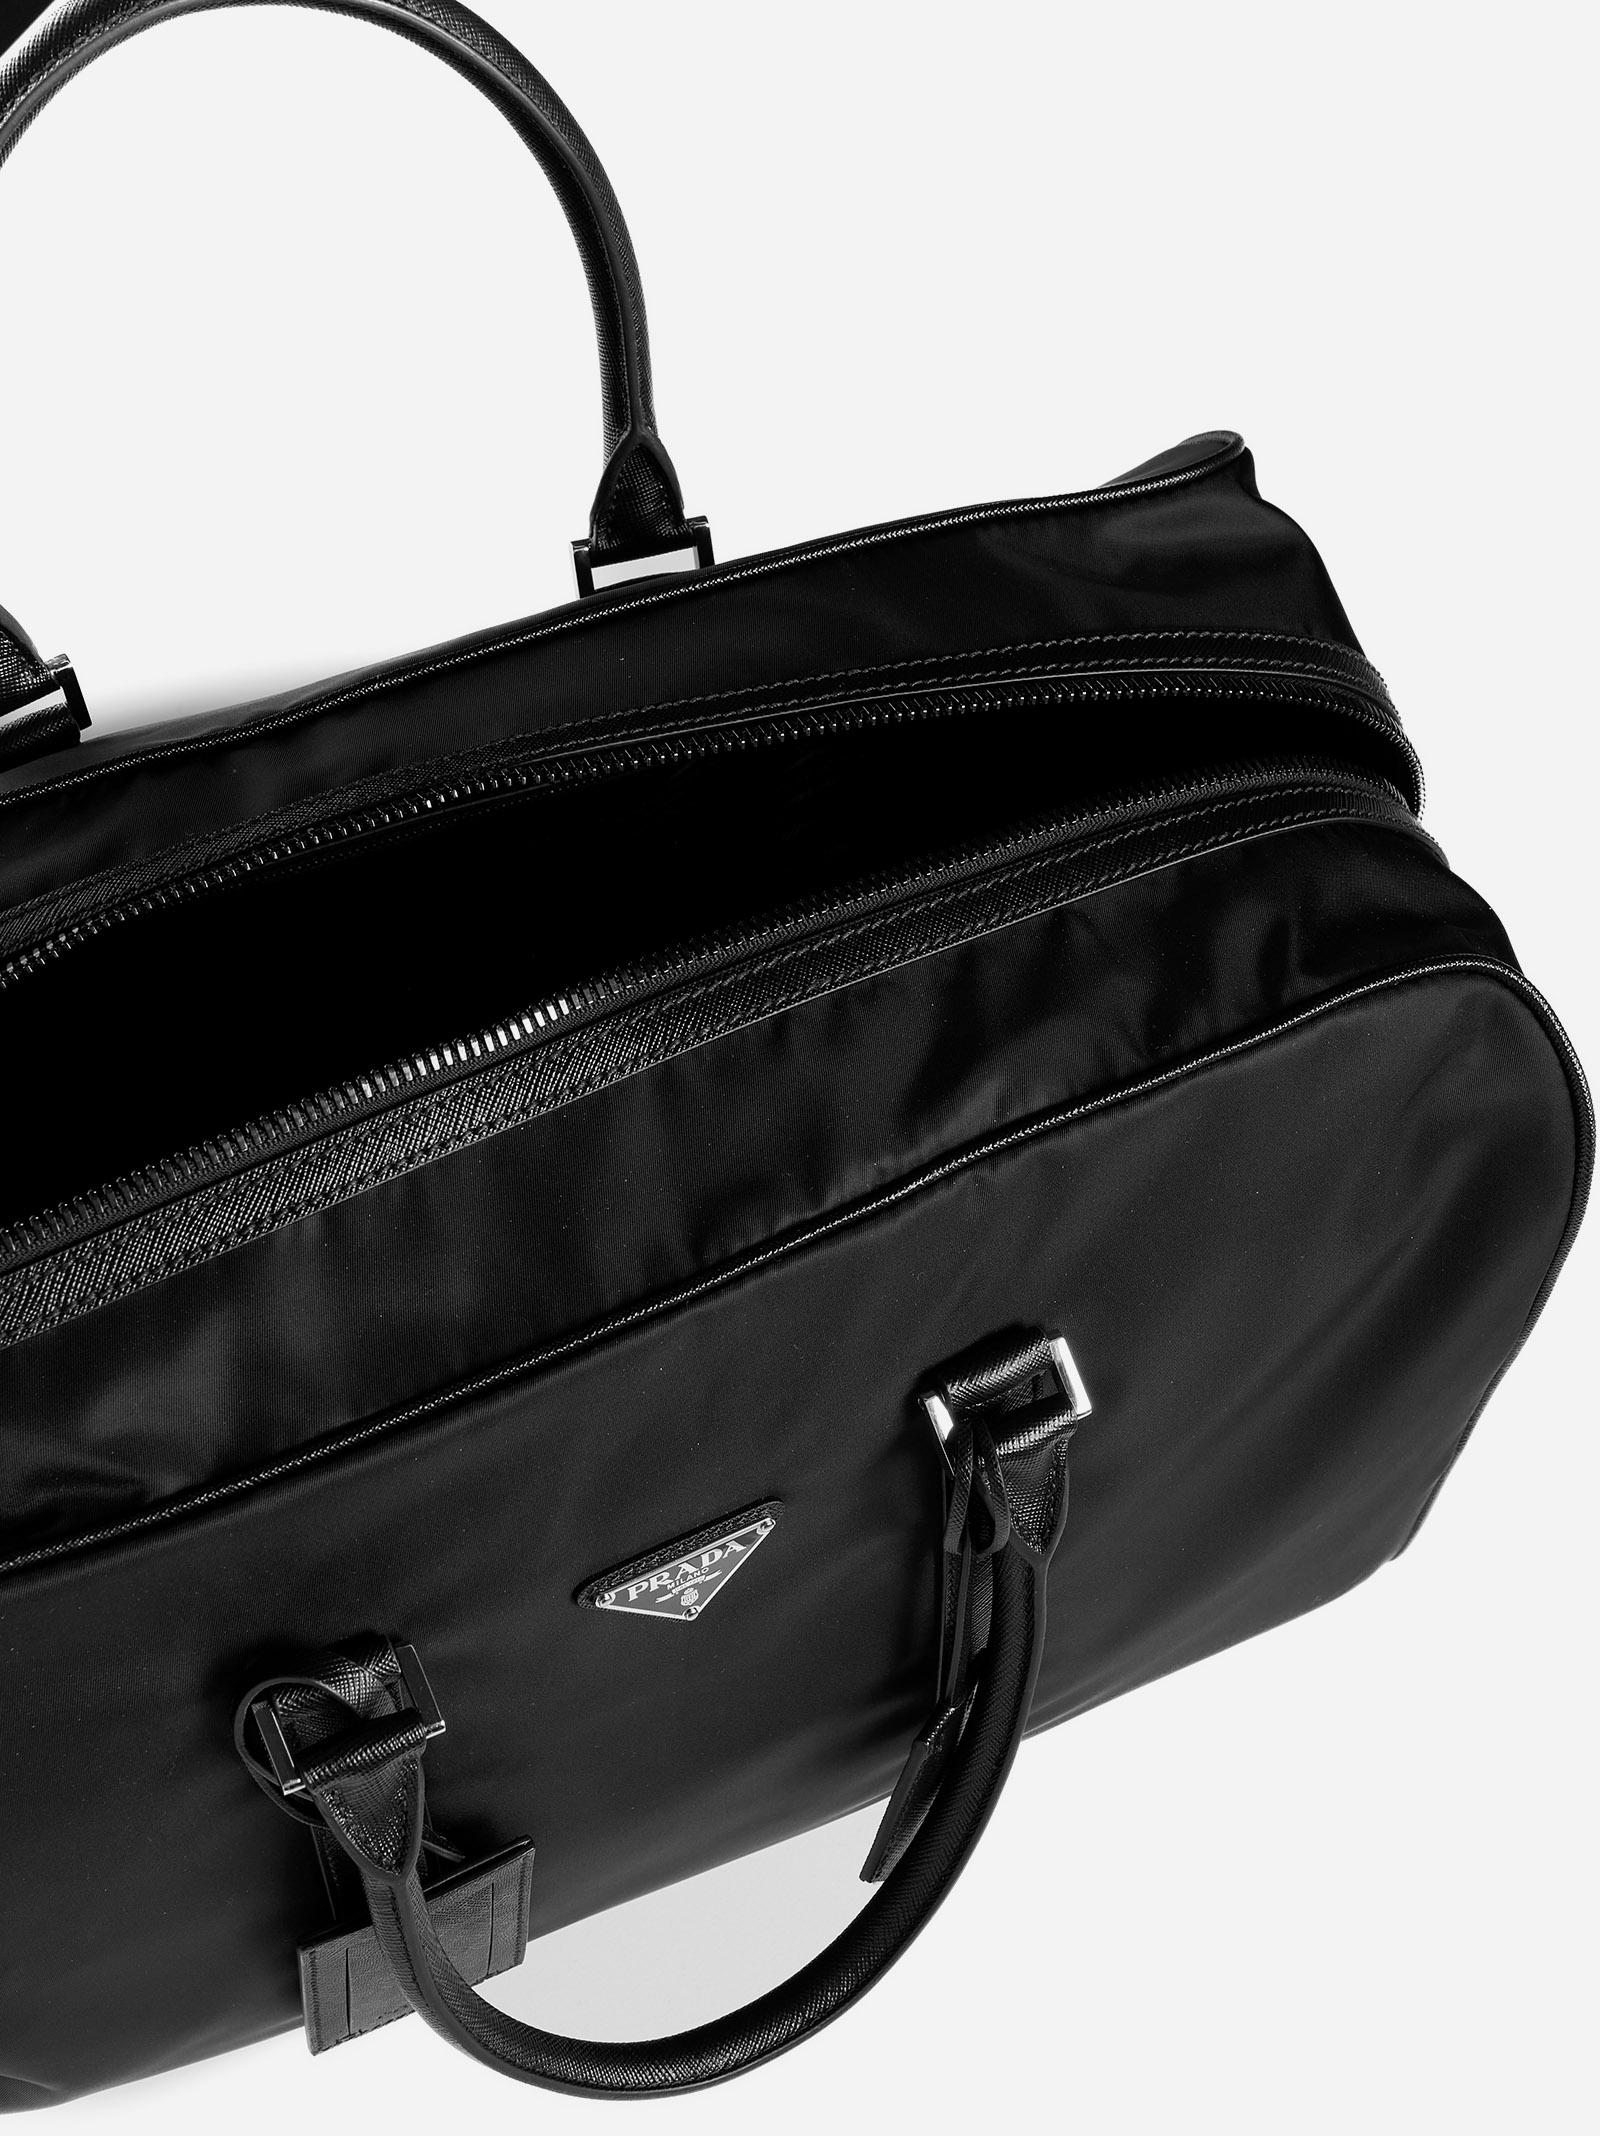 Re-Nylon and Saffiano leather duffle bag